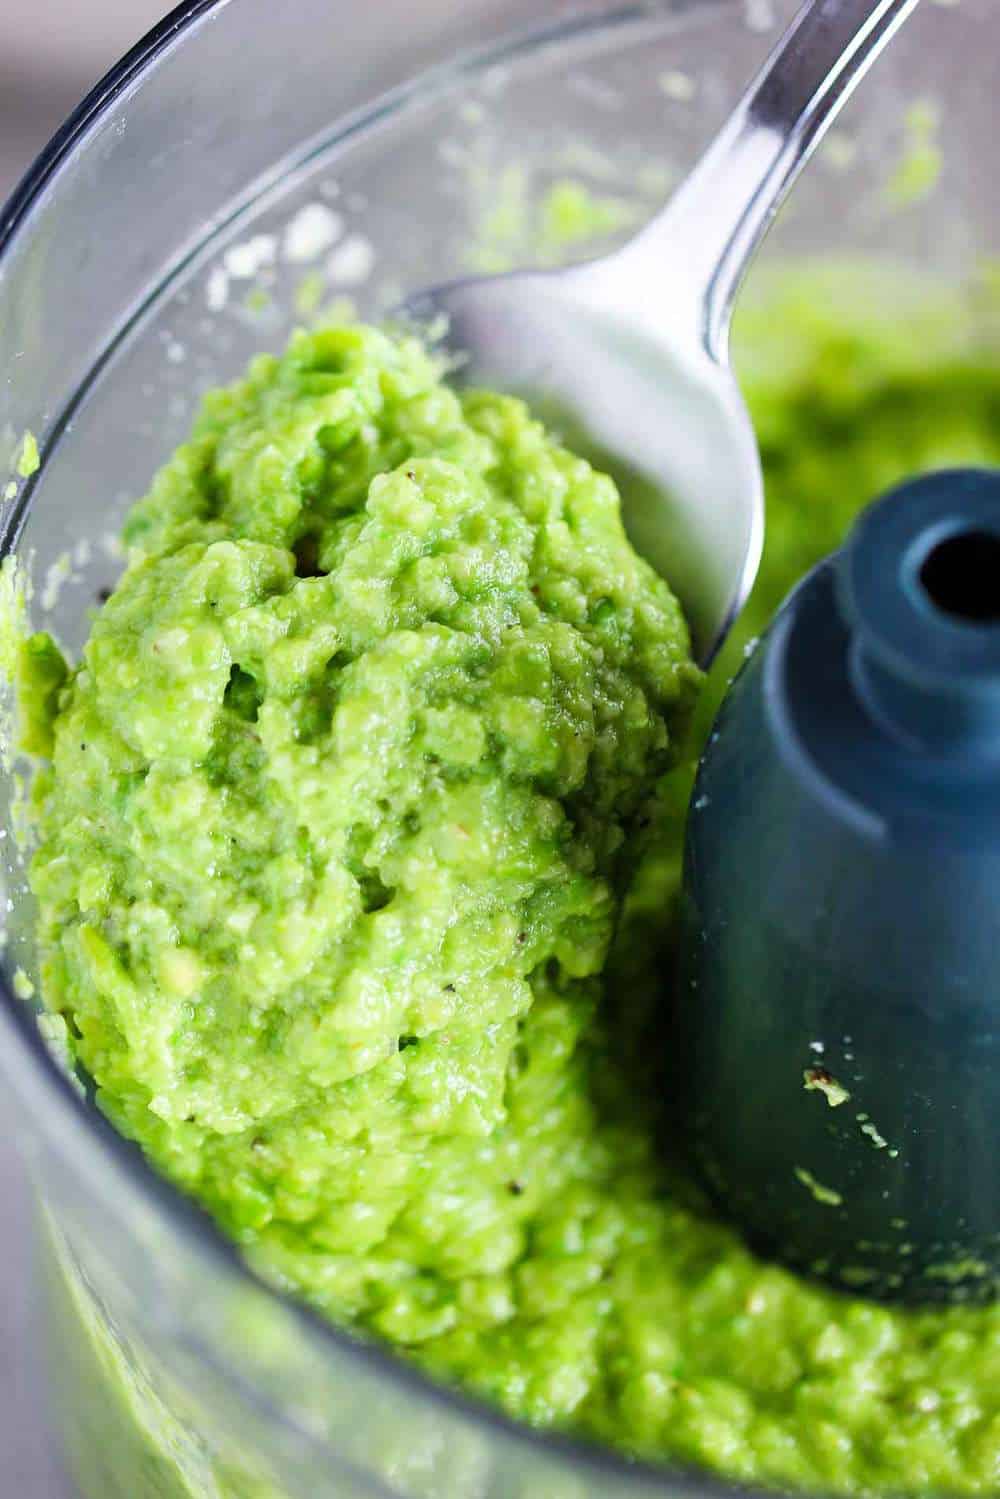 Pea pesto that has been processed in a food processor